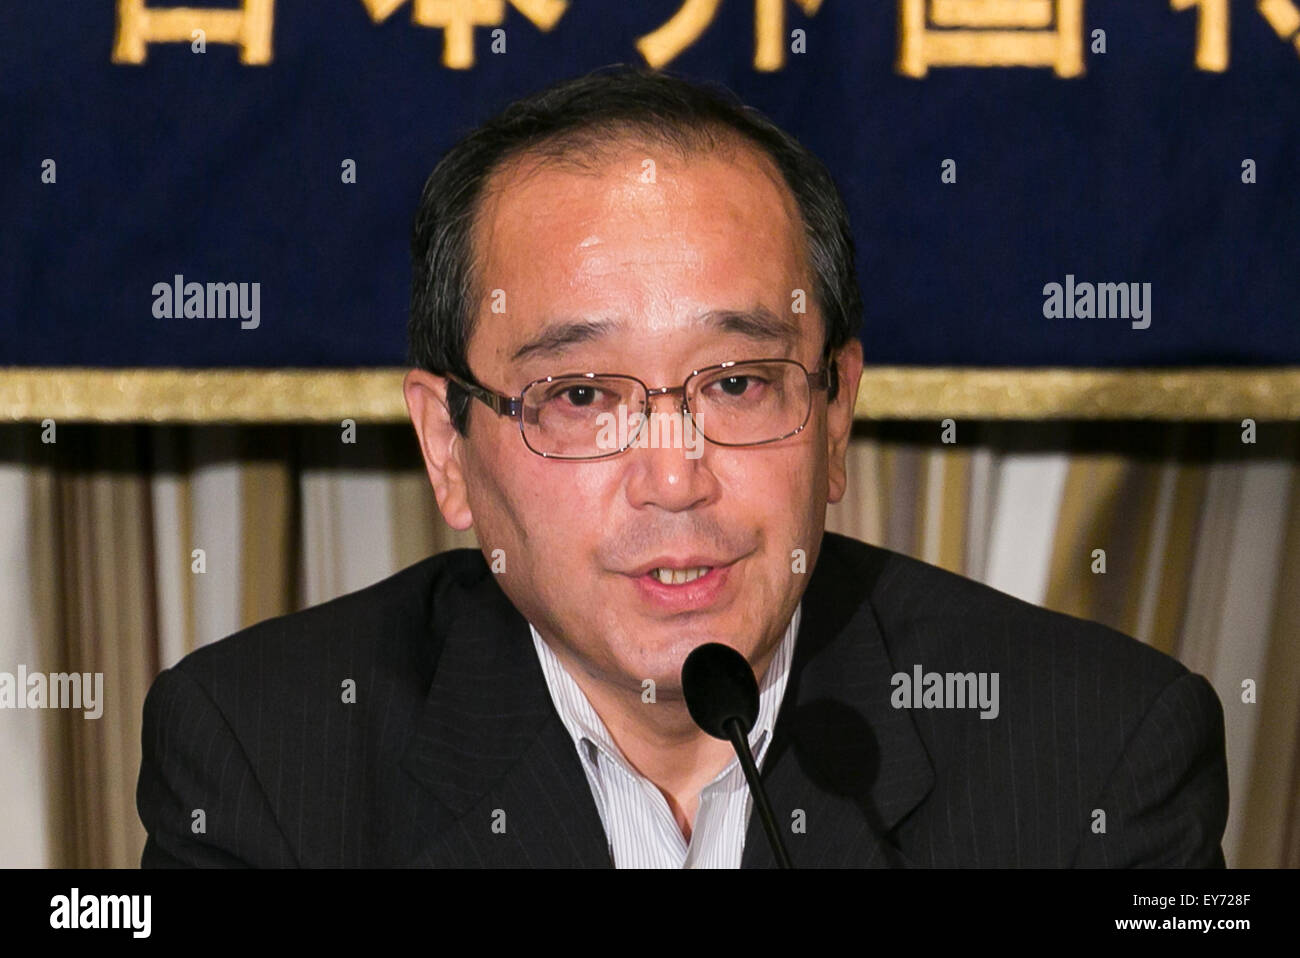 Tokyo, Japan. 23rd July, 2015. Kazumi Matsui, Mayor of Hiroshima speaks during a press conference at the Foreign Correspondents' Club of Japan on July 23, 2015, Tokyo, Japan. Mayor Matsui said that his city is resolved to eliminate all the nuclear weapons in the world so as never to repeat a tragedy such as the bombing of Hiroshima and Nagasaki. This year marks the 70th anniversary of the end of the Second World War and the atomic bombing of Hiroshima and Nagasaki on August 6th and 9th 1945. Credit:  Aflo Co. Ltd./Alamy Live News Stock Photo